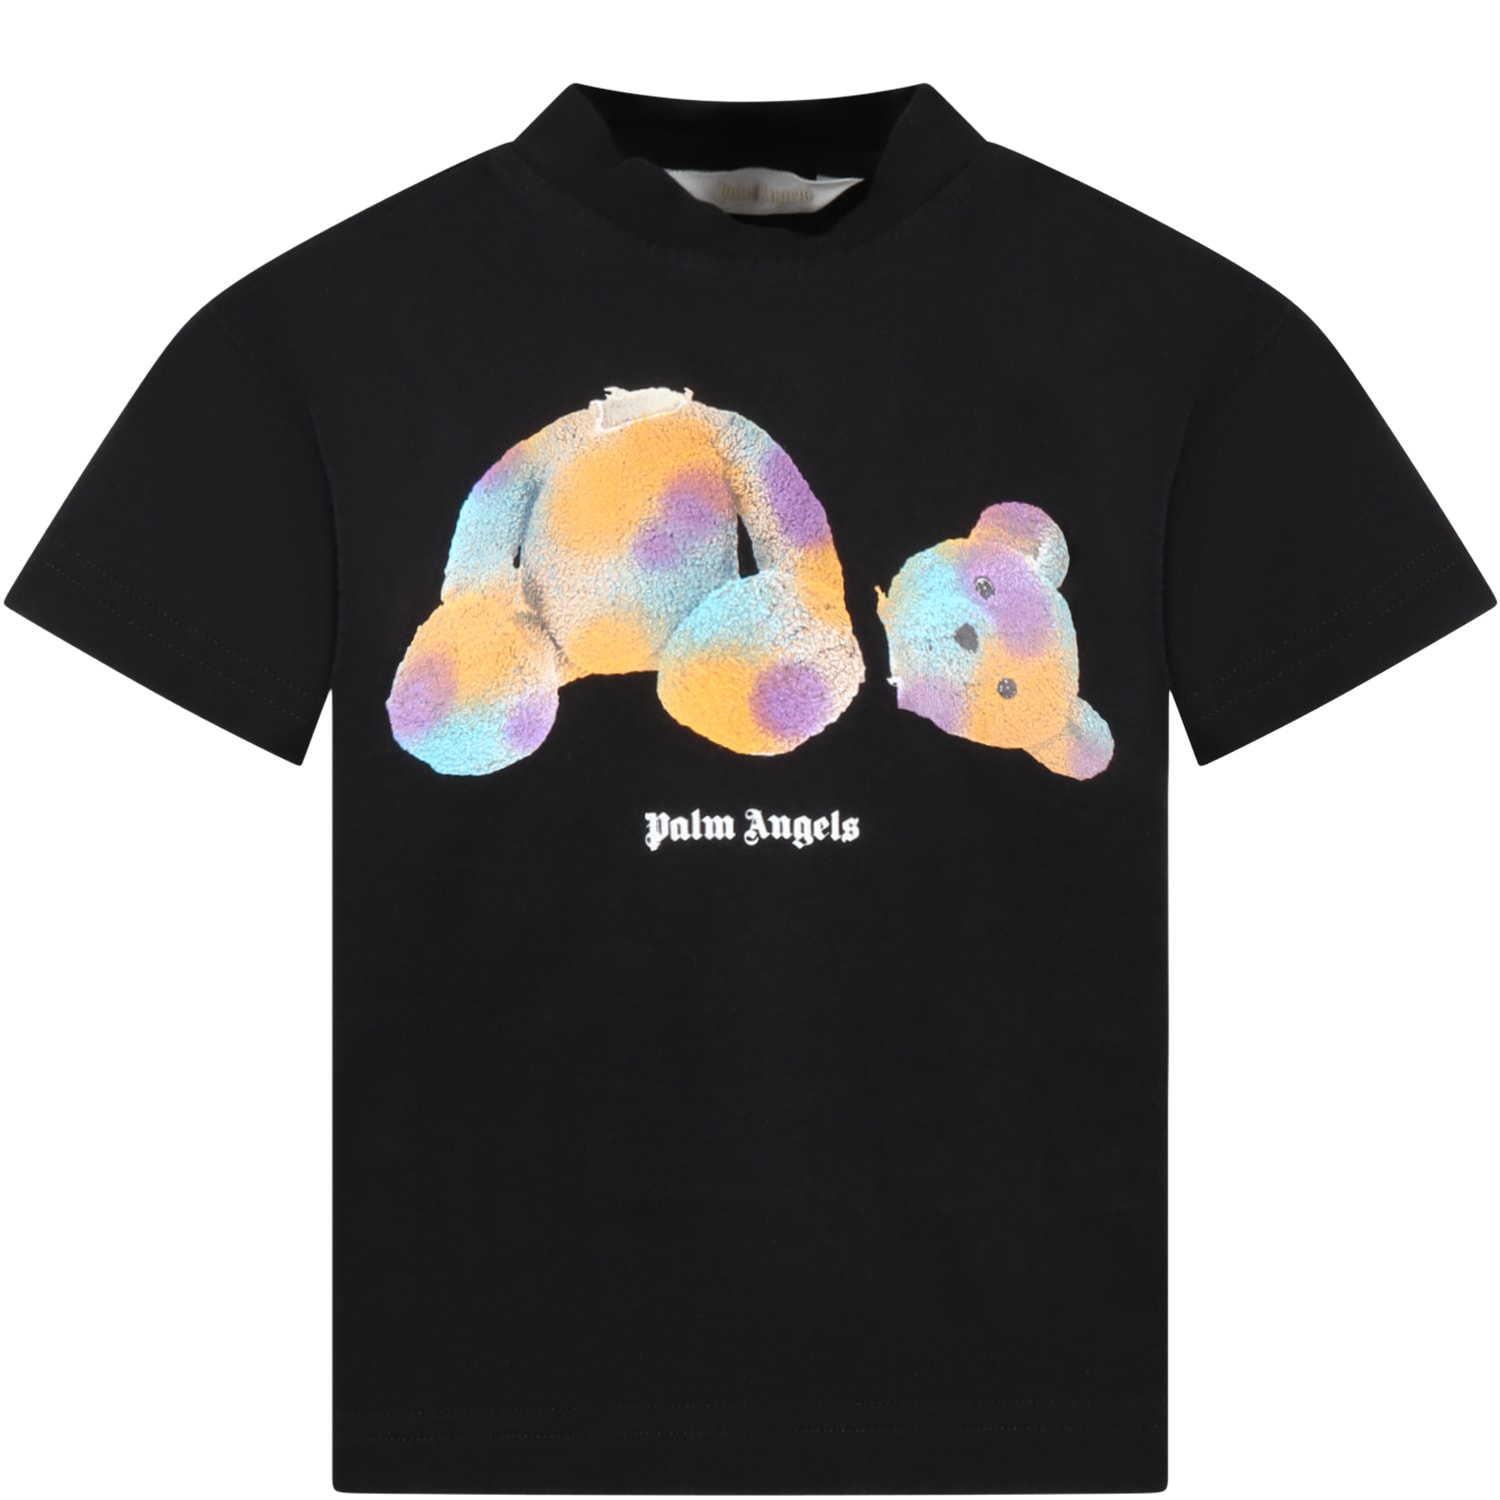 Palm Angels Black T-shirt For Kids With White Logo